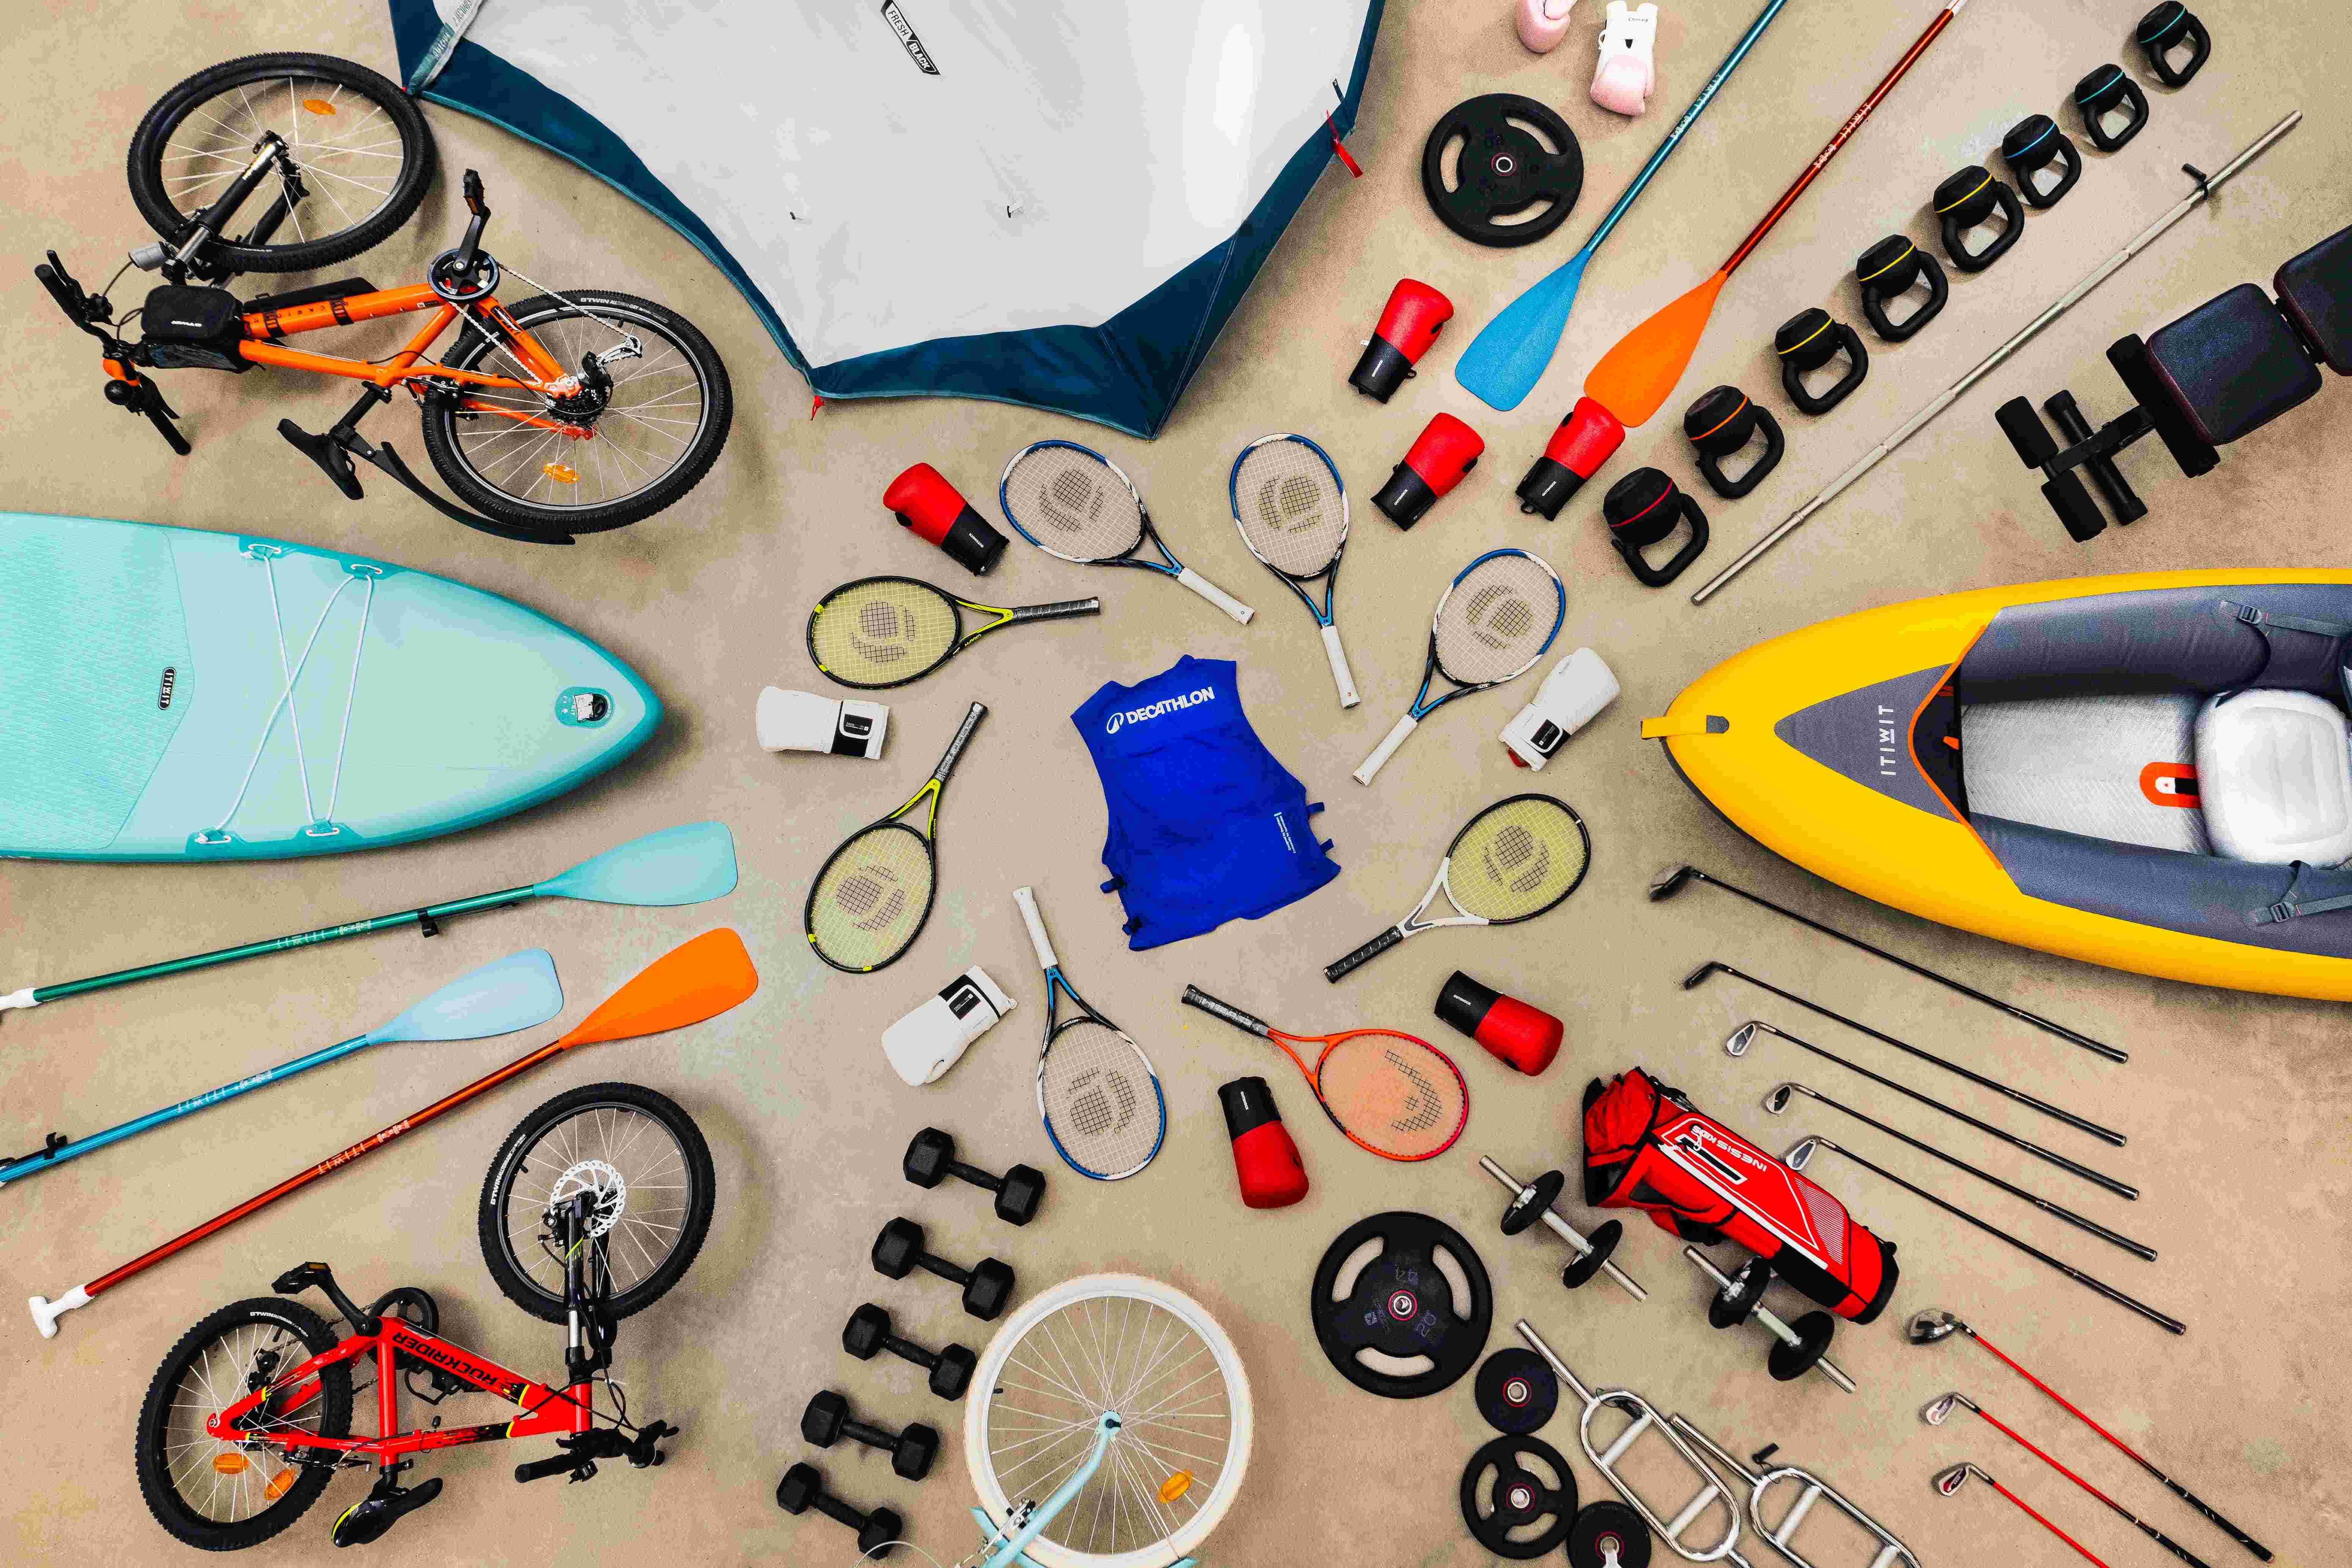 Decathlon expands buy-back scheme for sports gear to promote circular economy